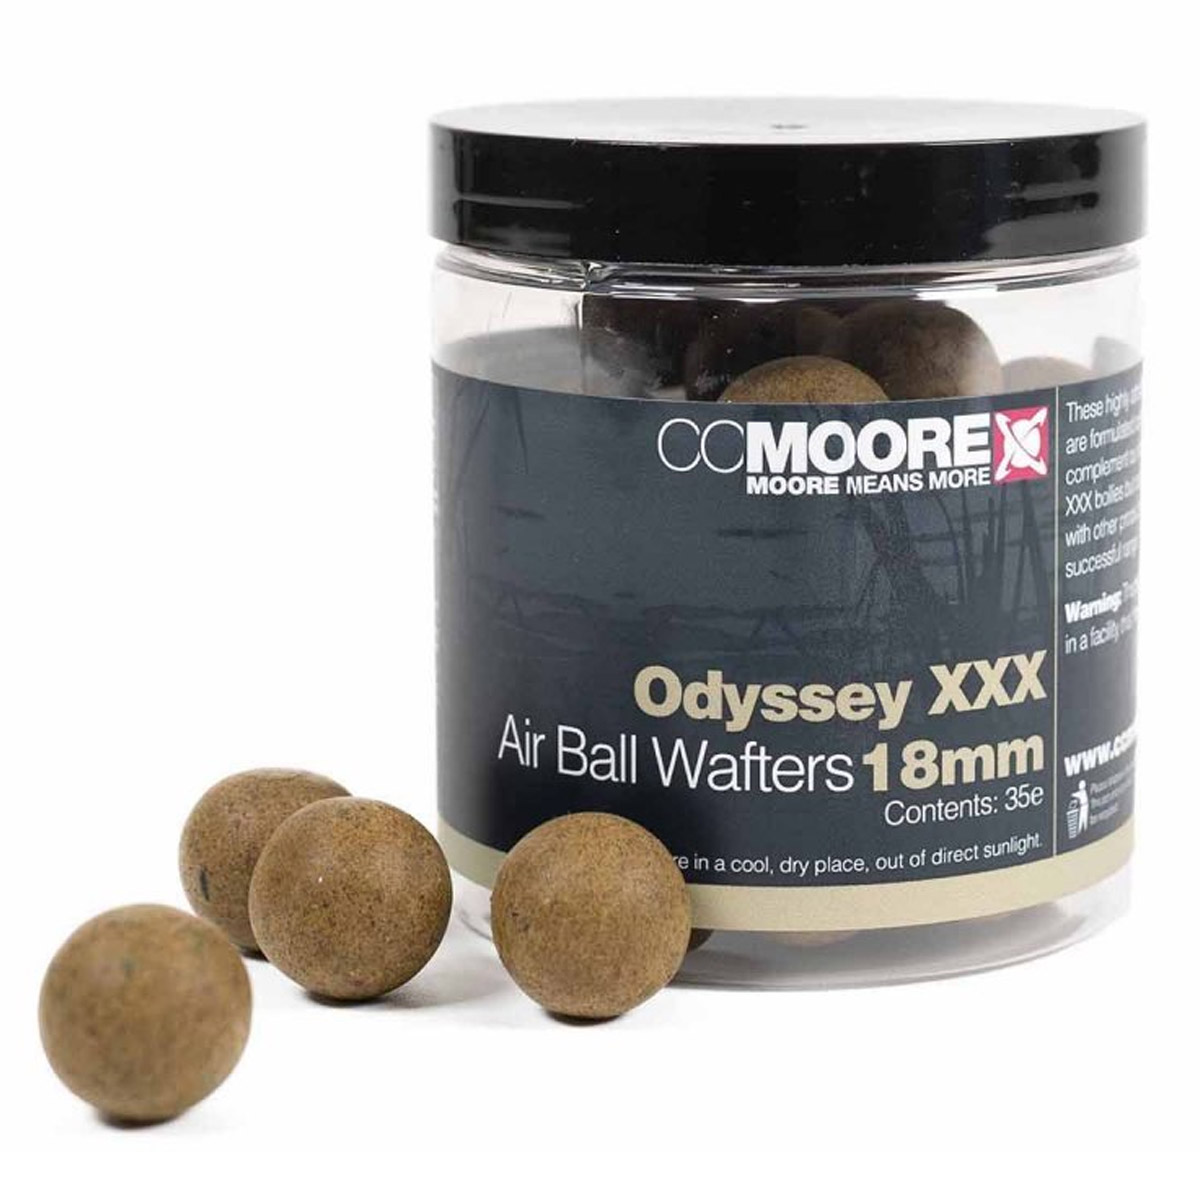 CC Moore Odyssey XXX Airball Wafters 18 mm